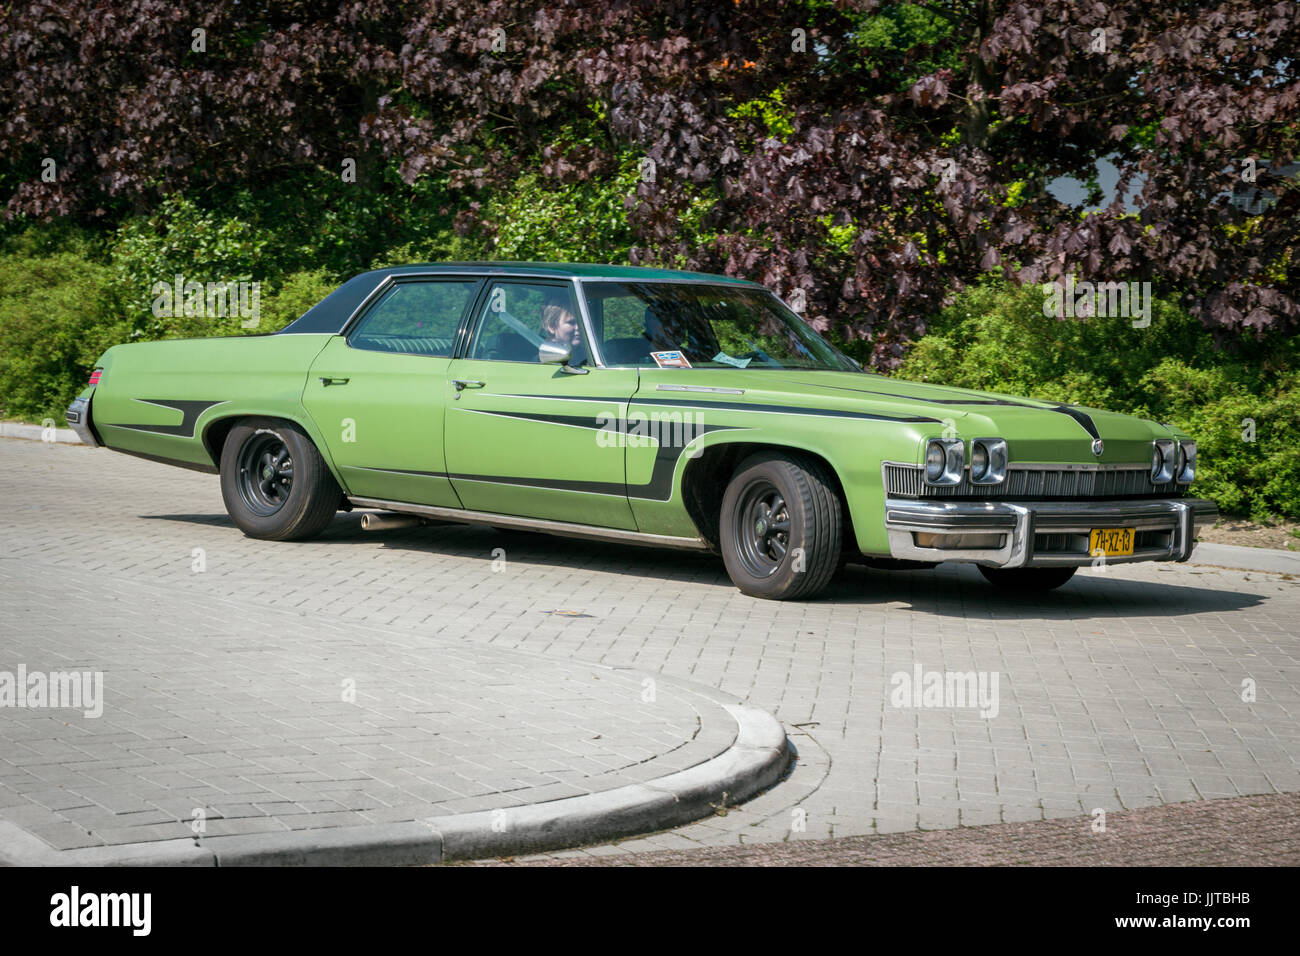 DEN BOSCH, THE NETHERLANDS - MAY 10, 2015: Green 1974 Buick Le Sabre classic car. Stock Photo